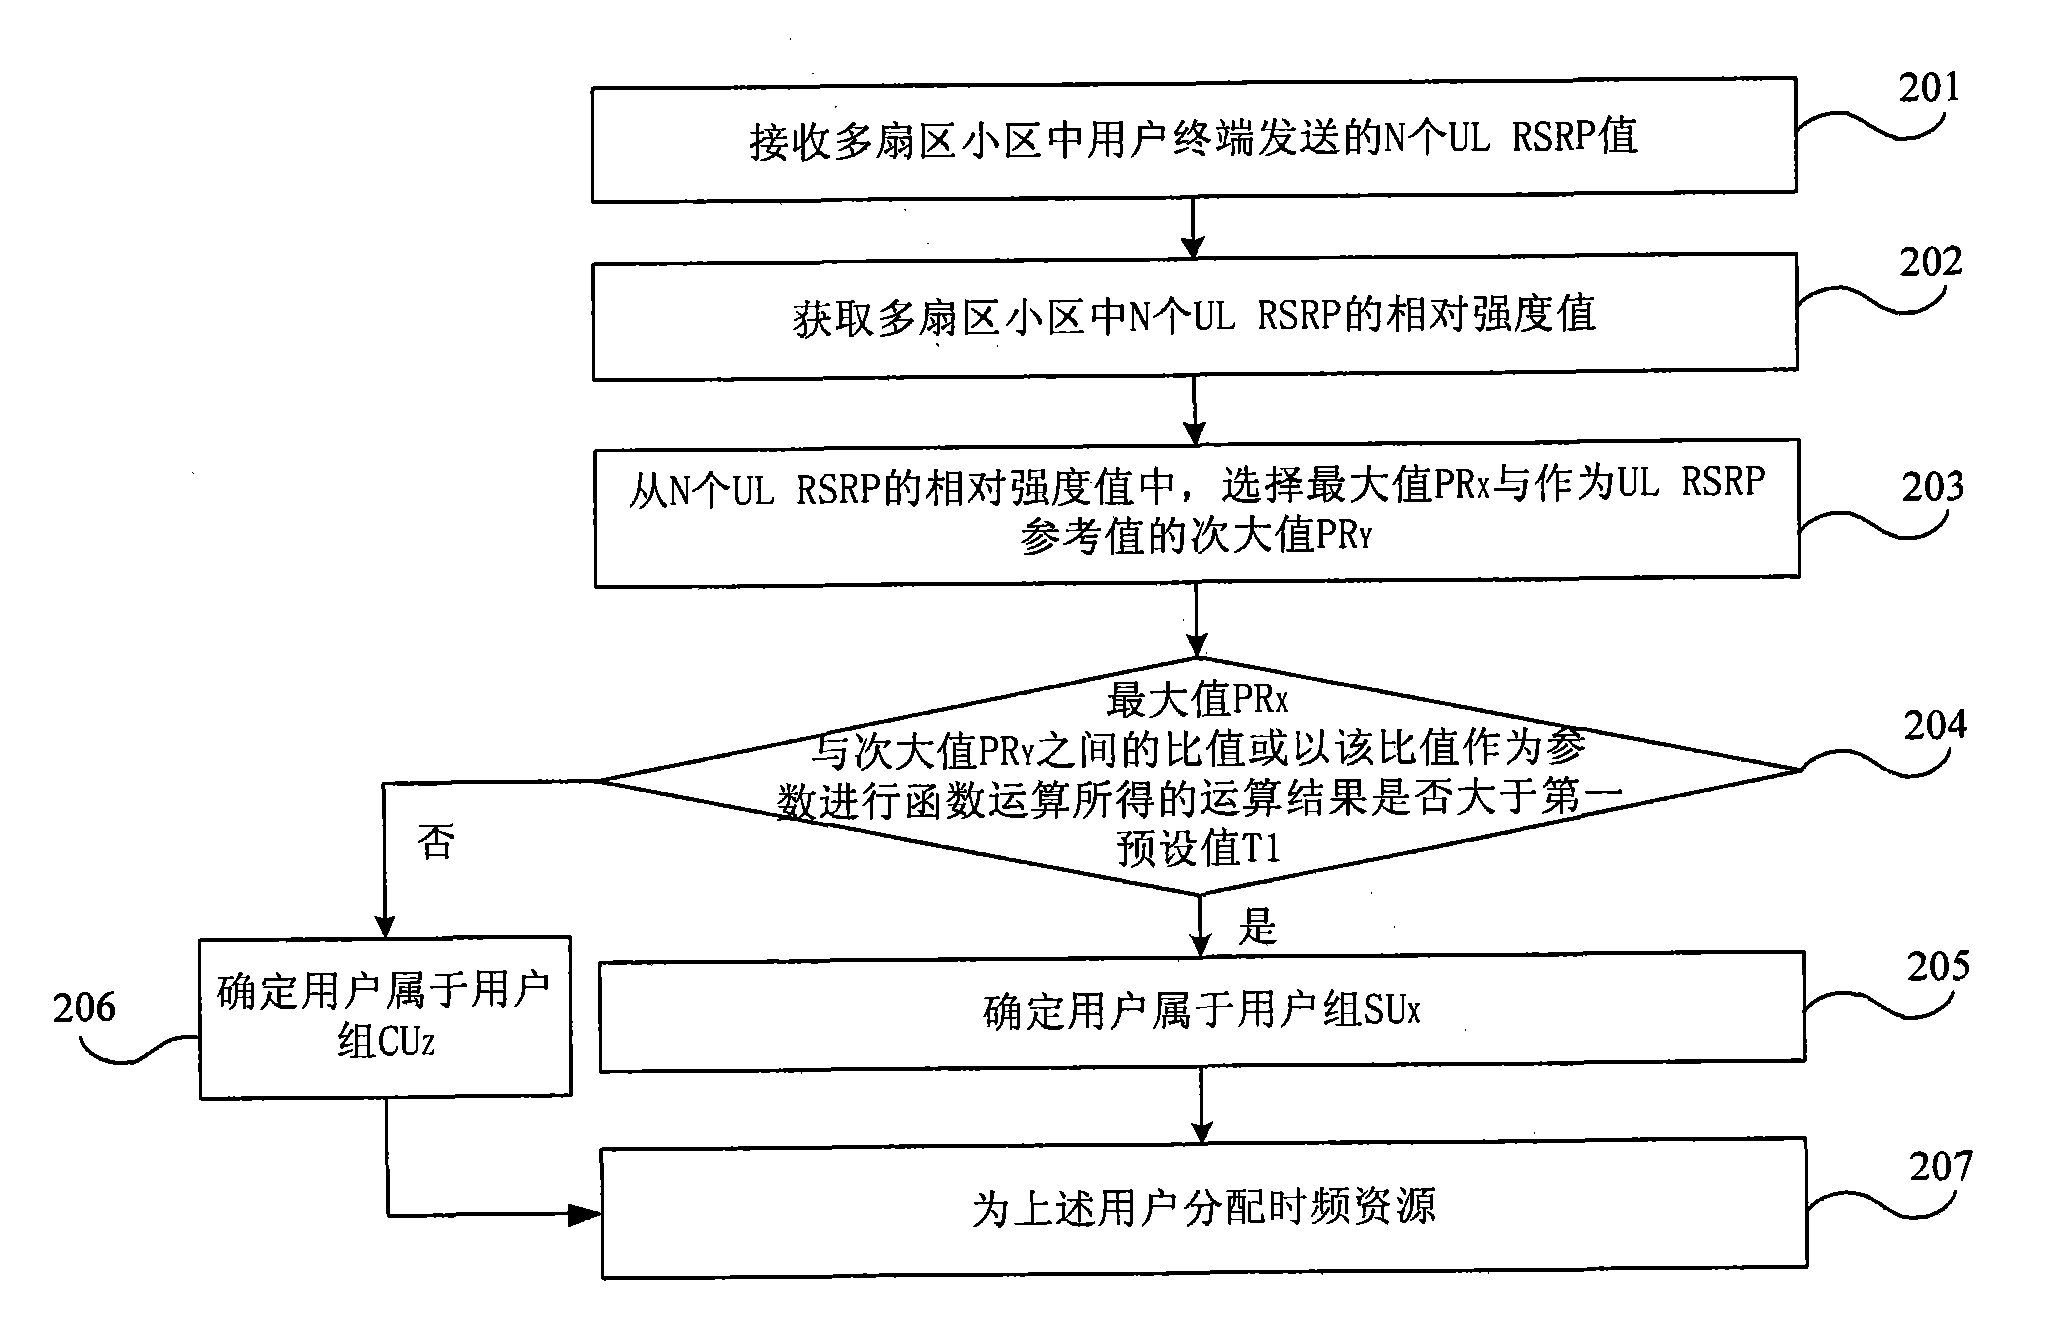 Processing method and equipment